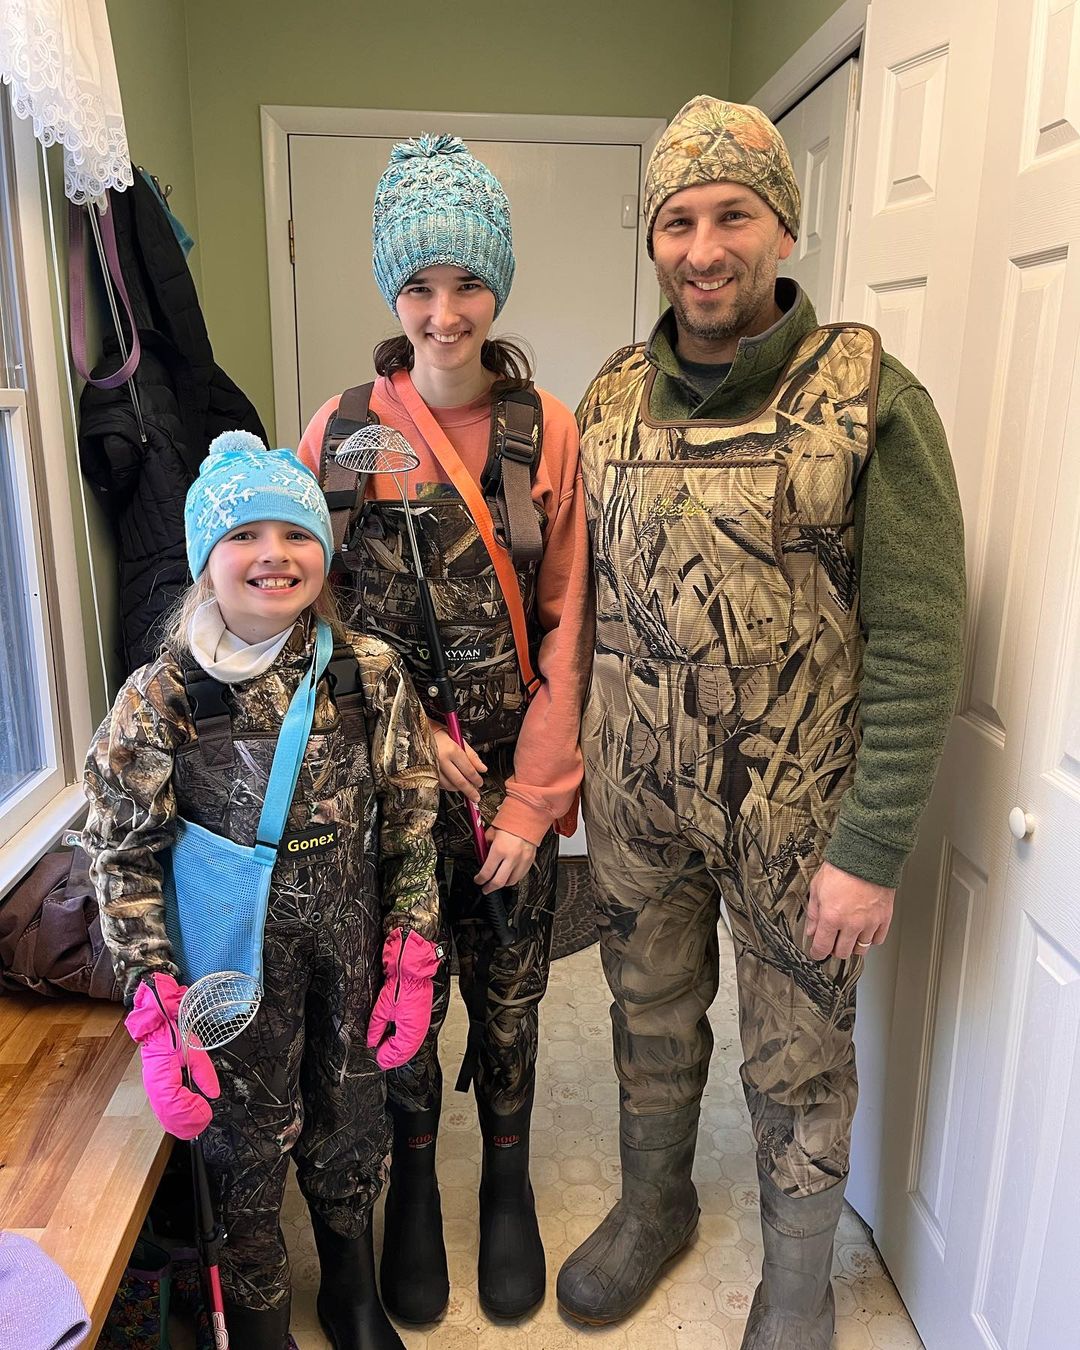 Molly Sampson with her sister Natalie and father Bruce, dressed in hunting gear to go fossil hunting.